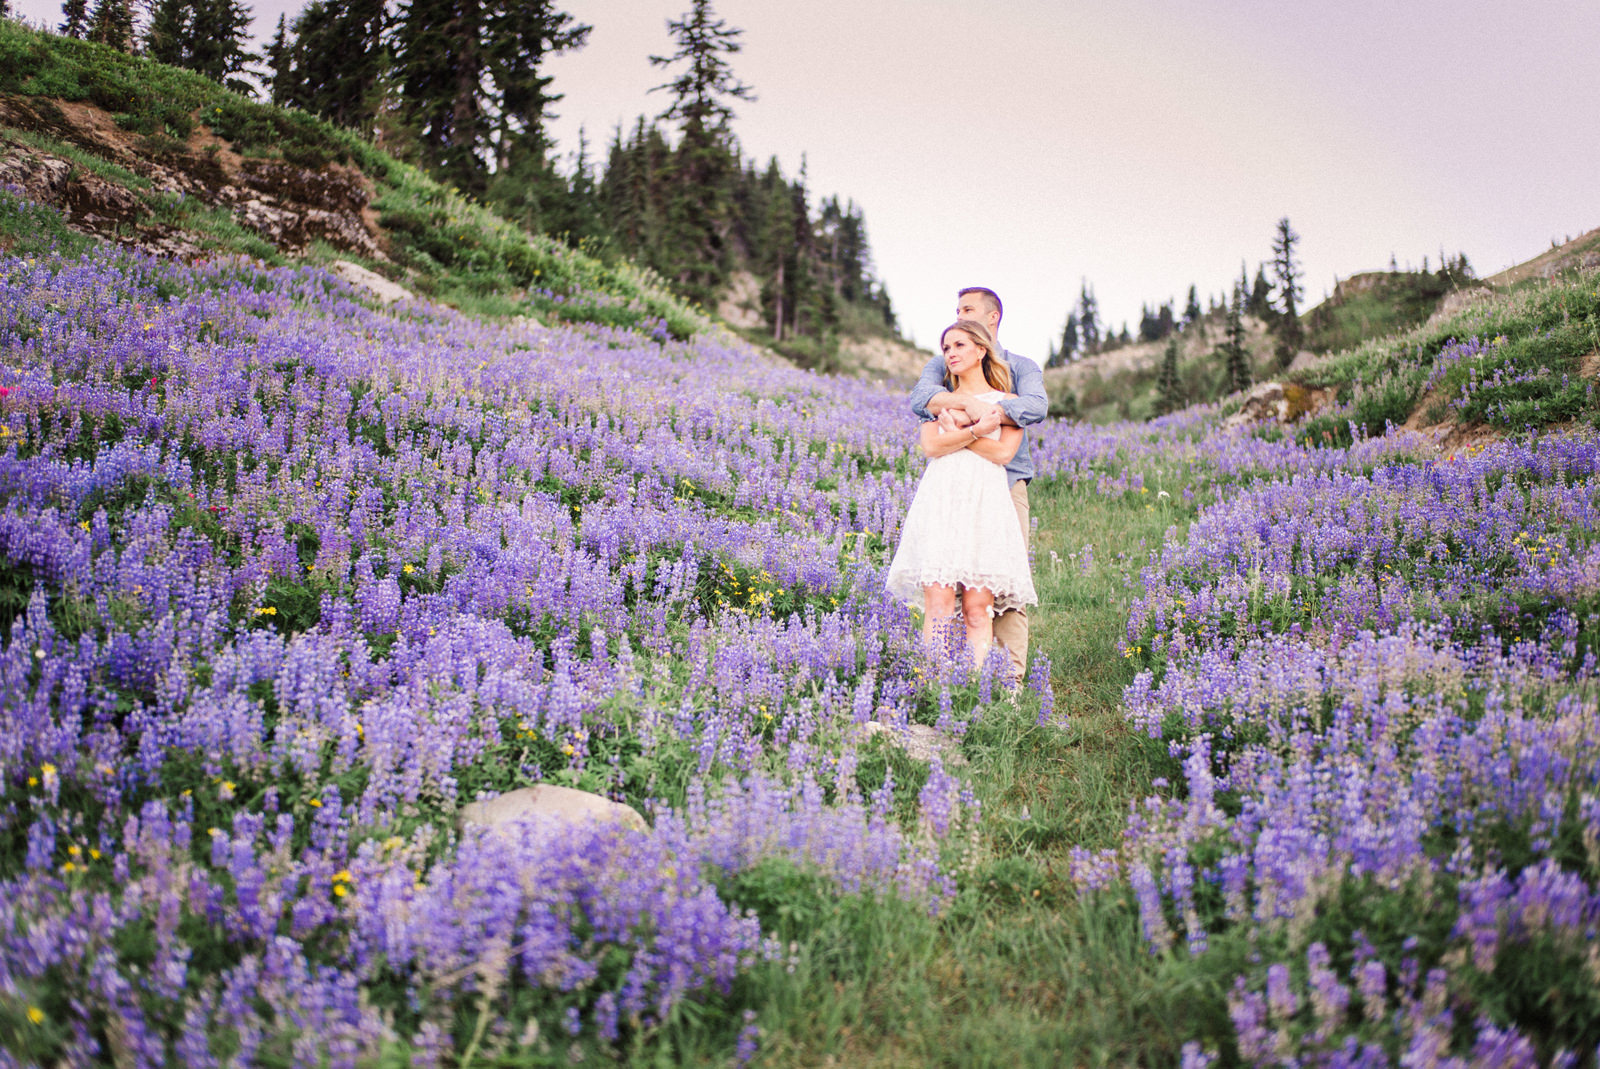 007-pacific-northwest-engagement-session-with-wildflowers-by-ryan-flynn.jpg